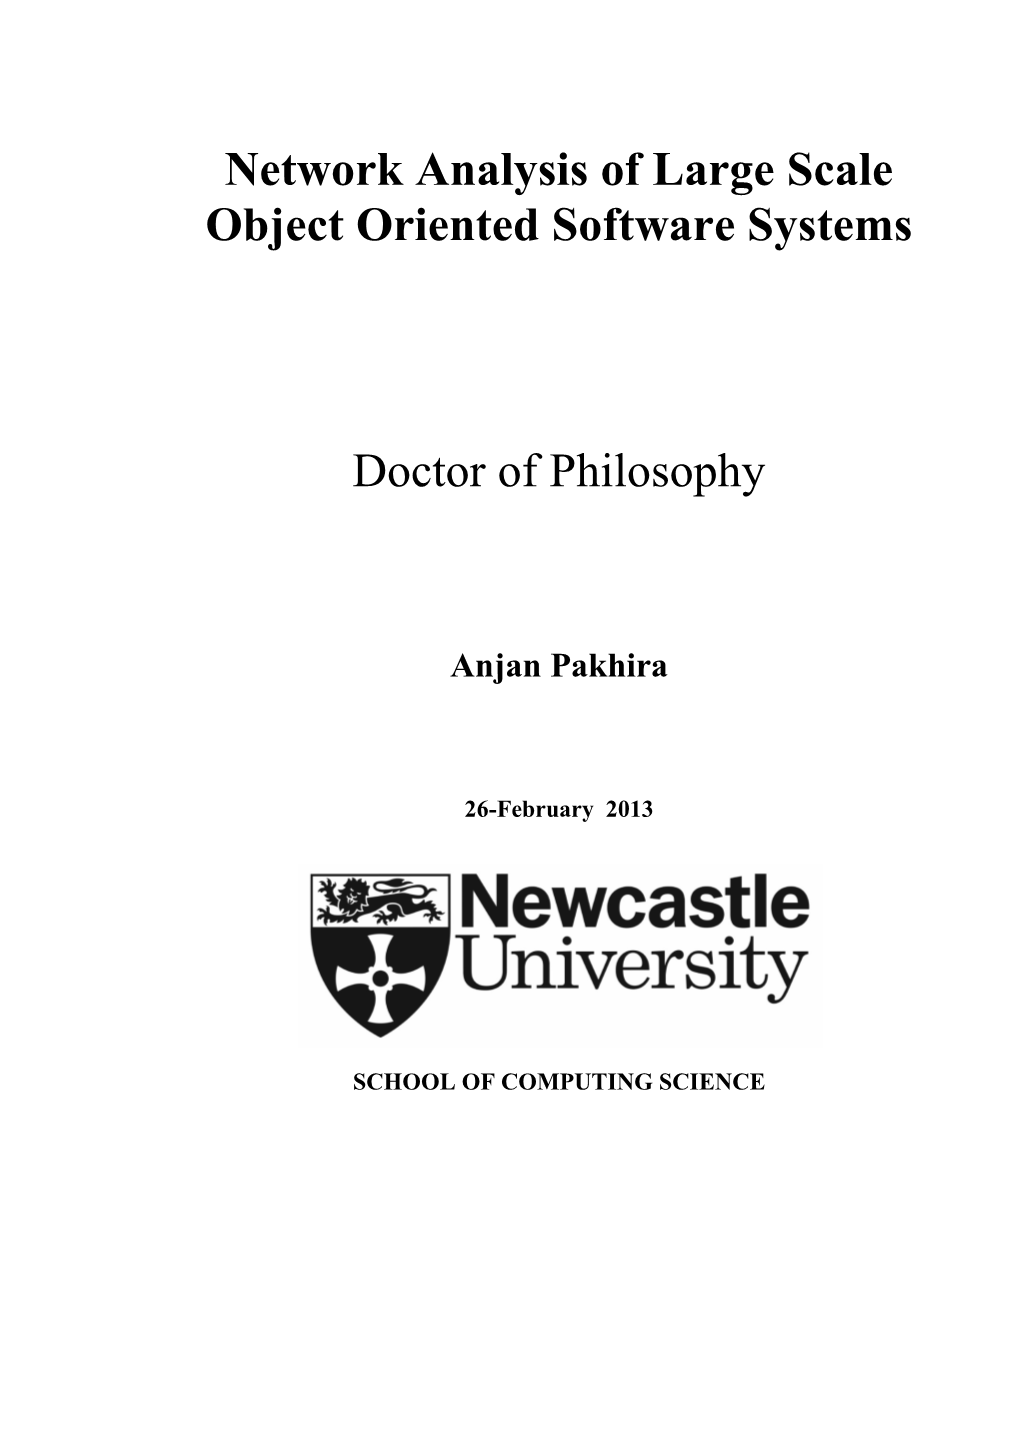 Network Analysis of Large Scale Object Oriented Software Systems